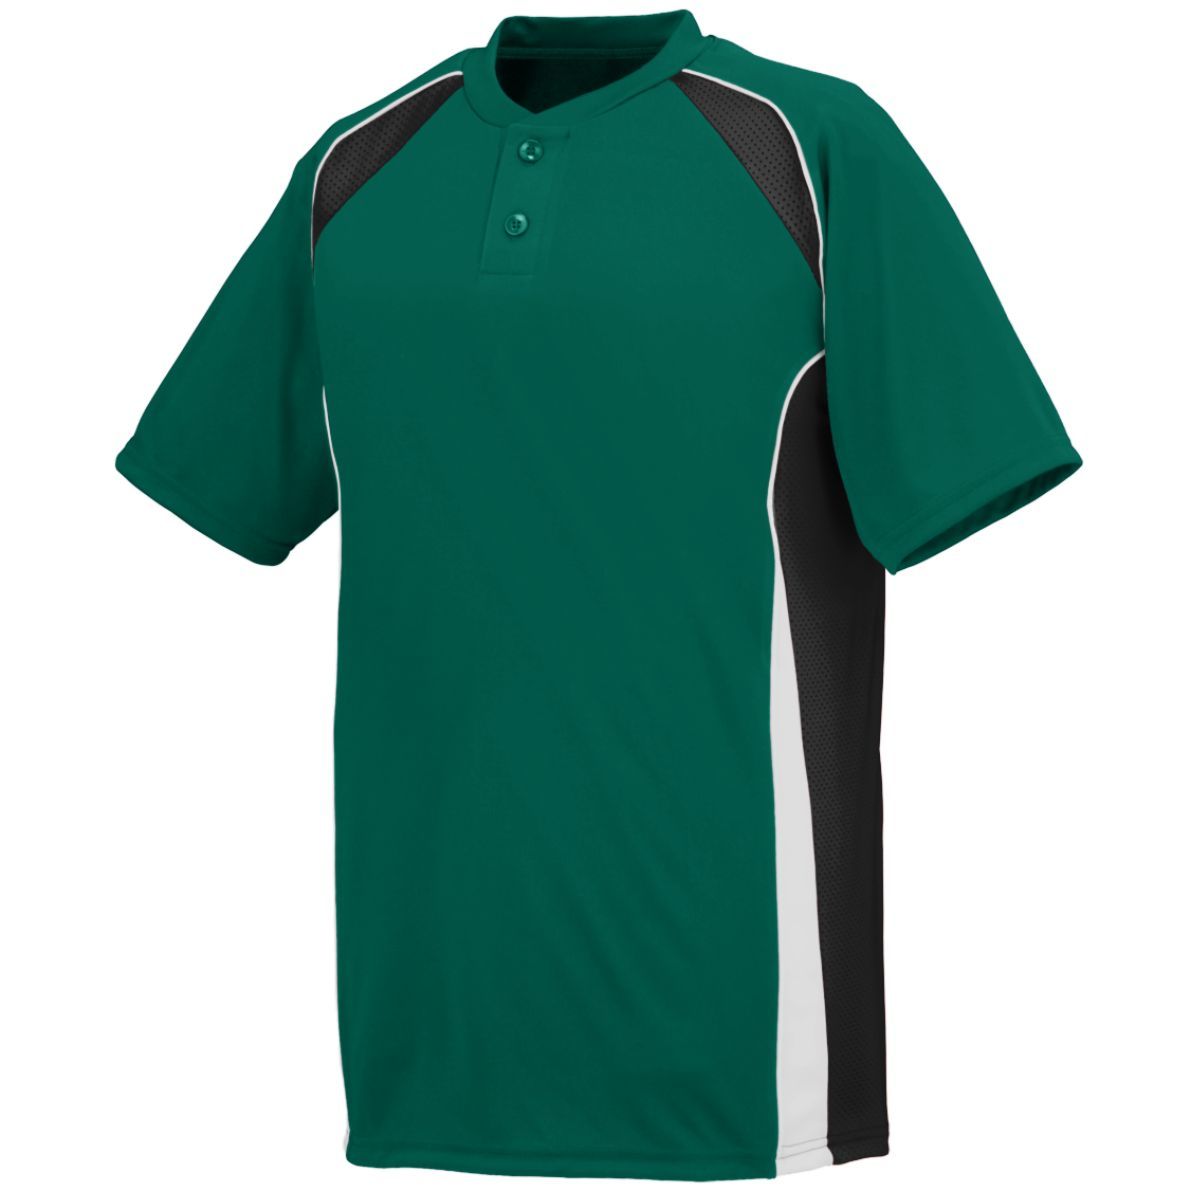 Augusta Sportswear Youth Base Hit Jersey in Dark Green/Black/White  -Part of the Youth, Youth-Jersey, Augusta-Products, Baseball, Shirts, All-Sports, All-Sports-1 product lines at KanaleyCreations.com